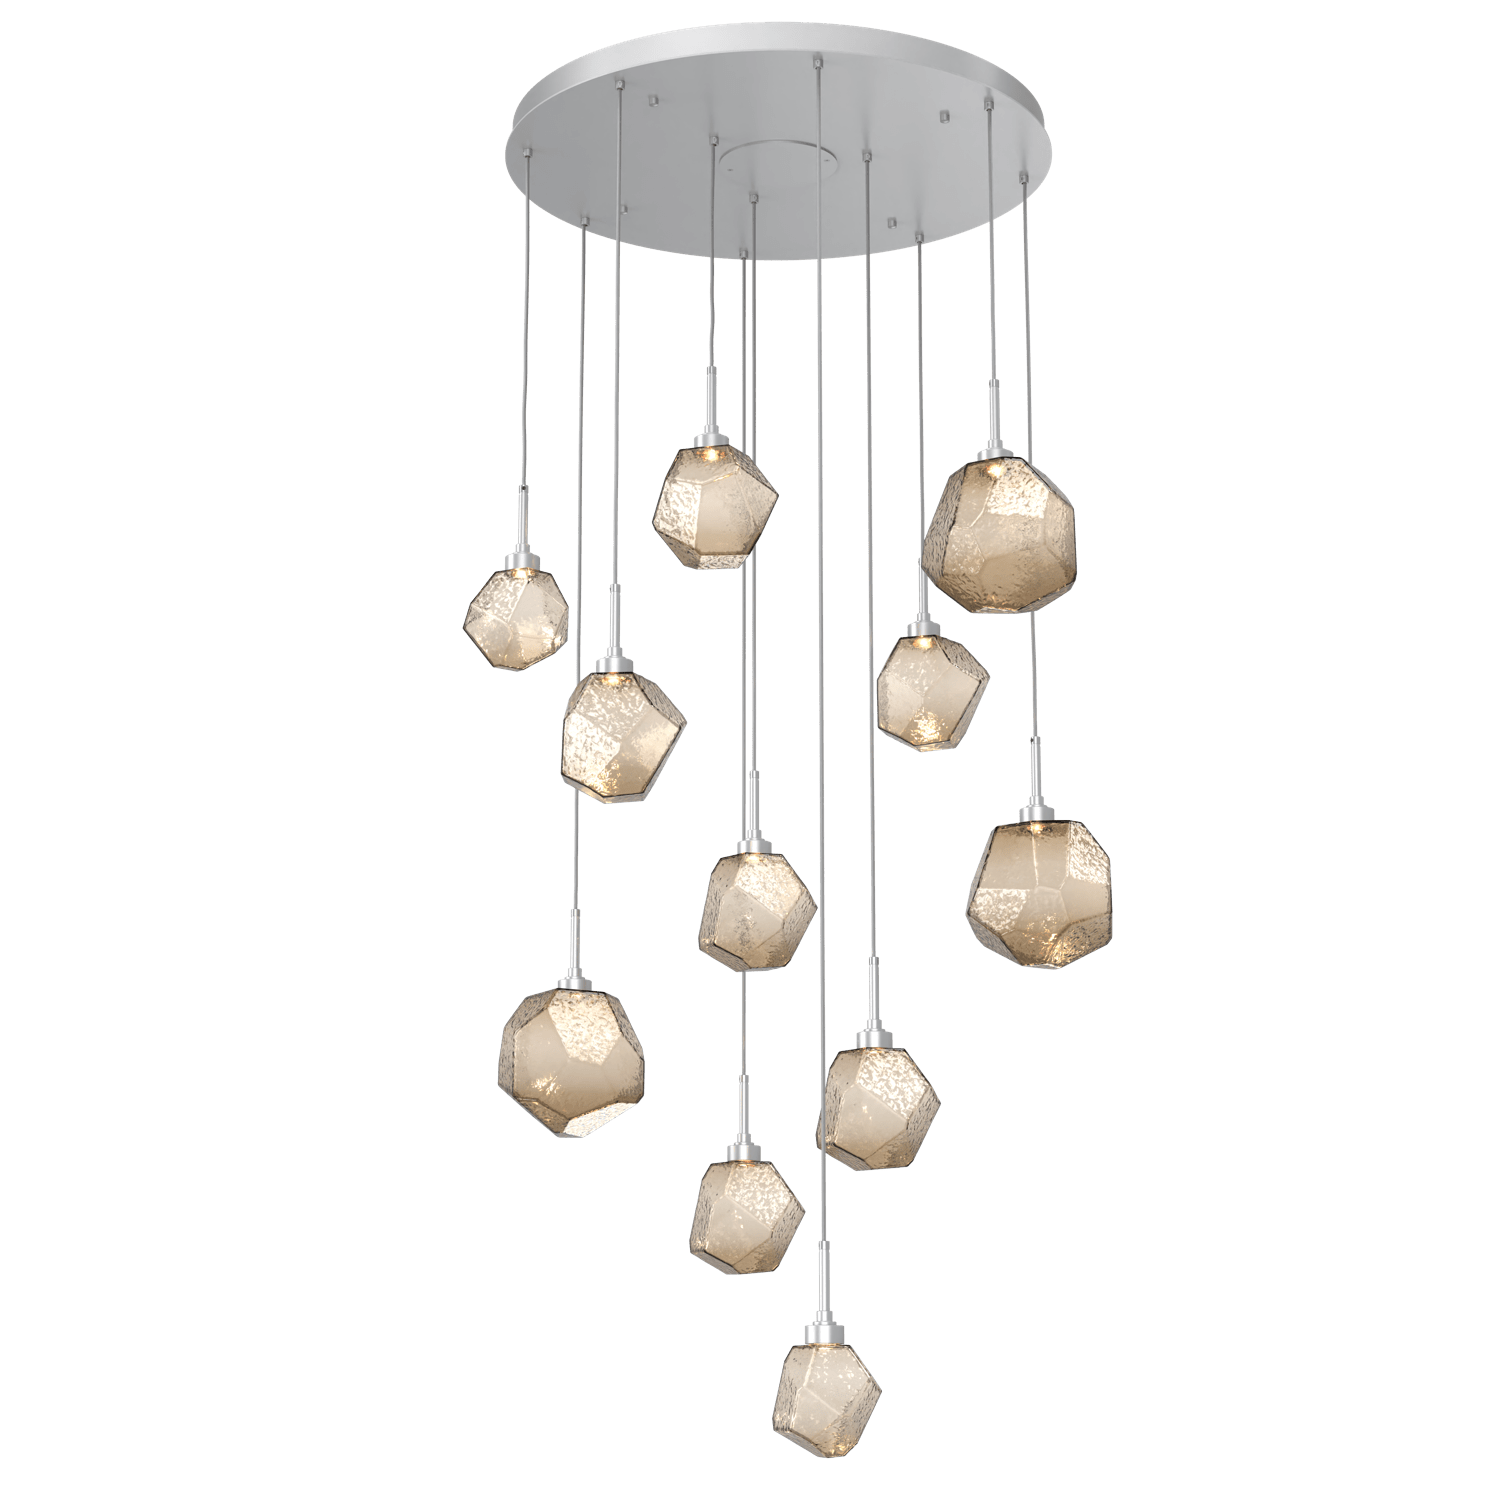 CHB0039-11-CS-B-Hammerton-Studio-Gem-11-light-round-pendant-chandelier-with-classic-silver-finish-and-bronze-blown-glass-shades-and-LED-lamping